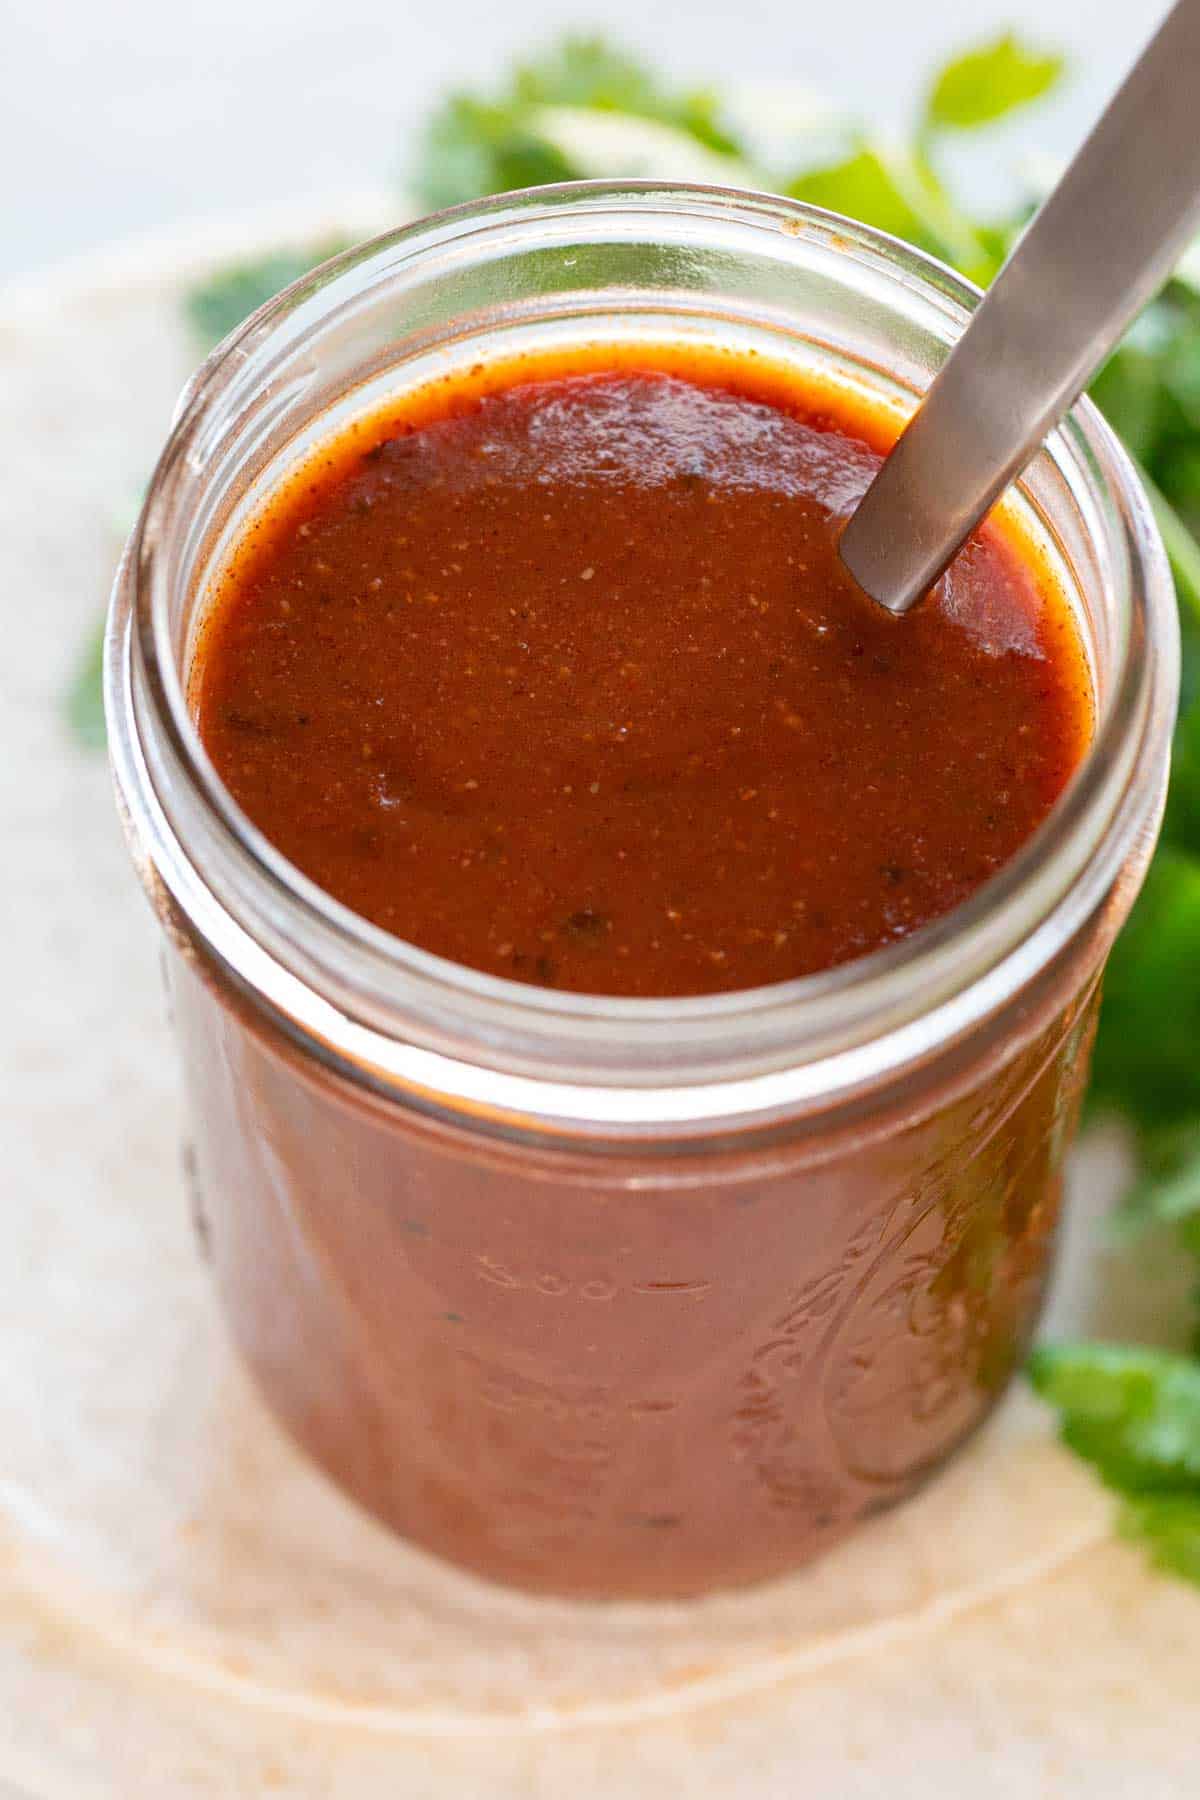 Jar of red enchilada sauce with a spoon, tortillas, and cilantro arranged around it.